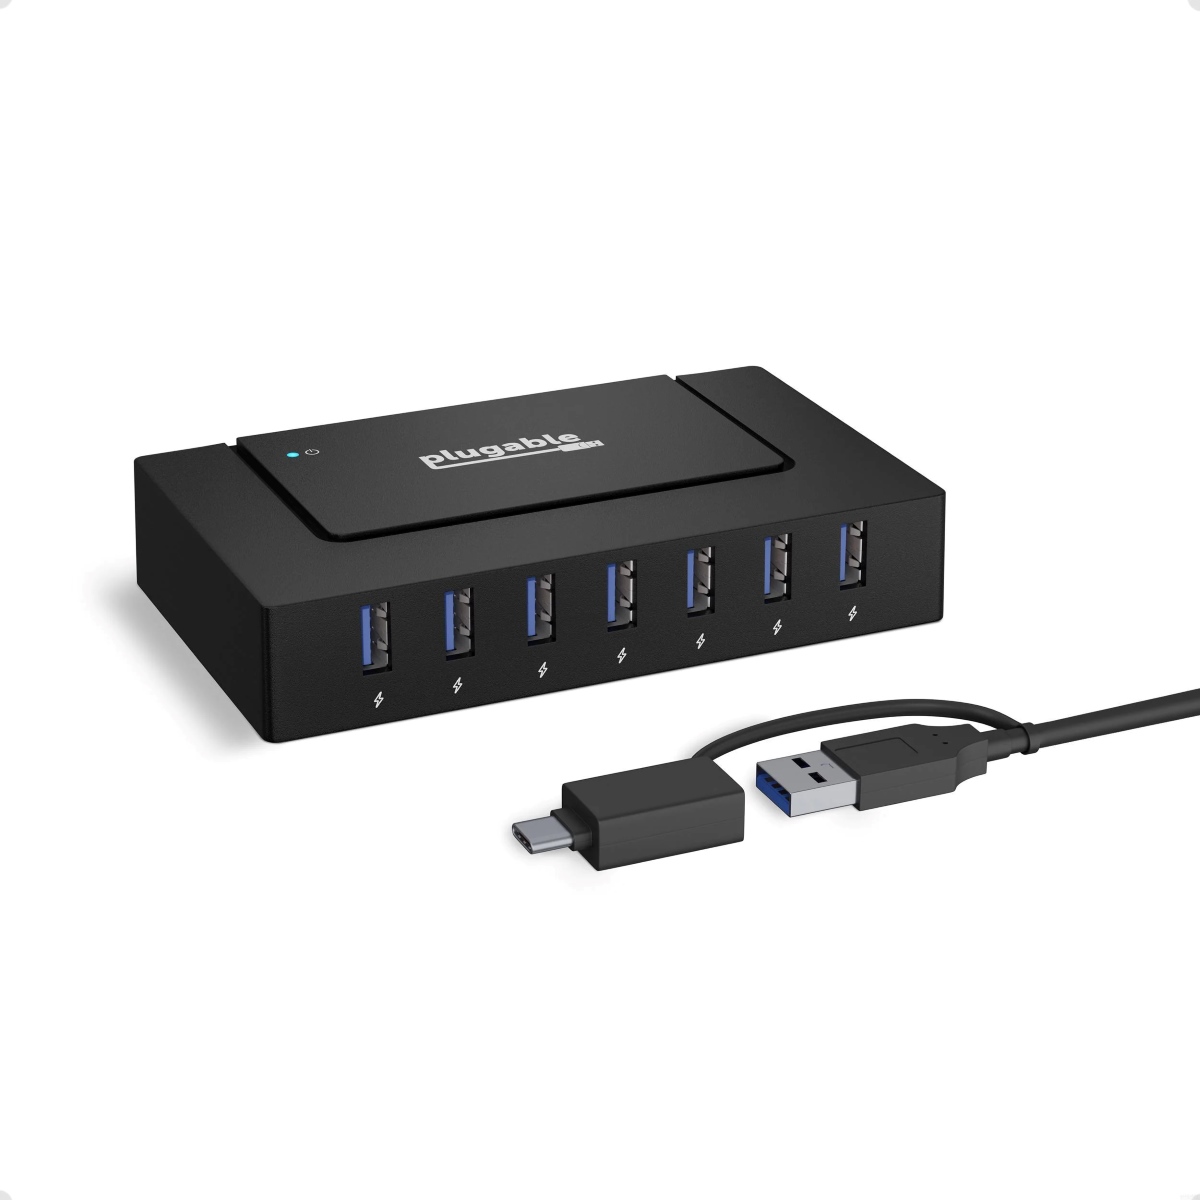 How Much Voltage Does A USB Hub Require?